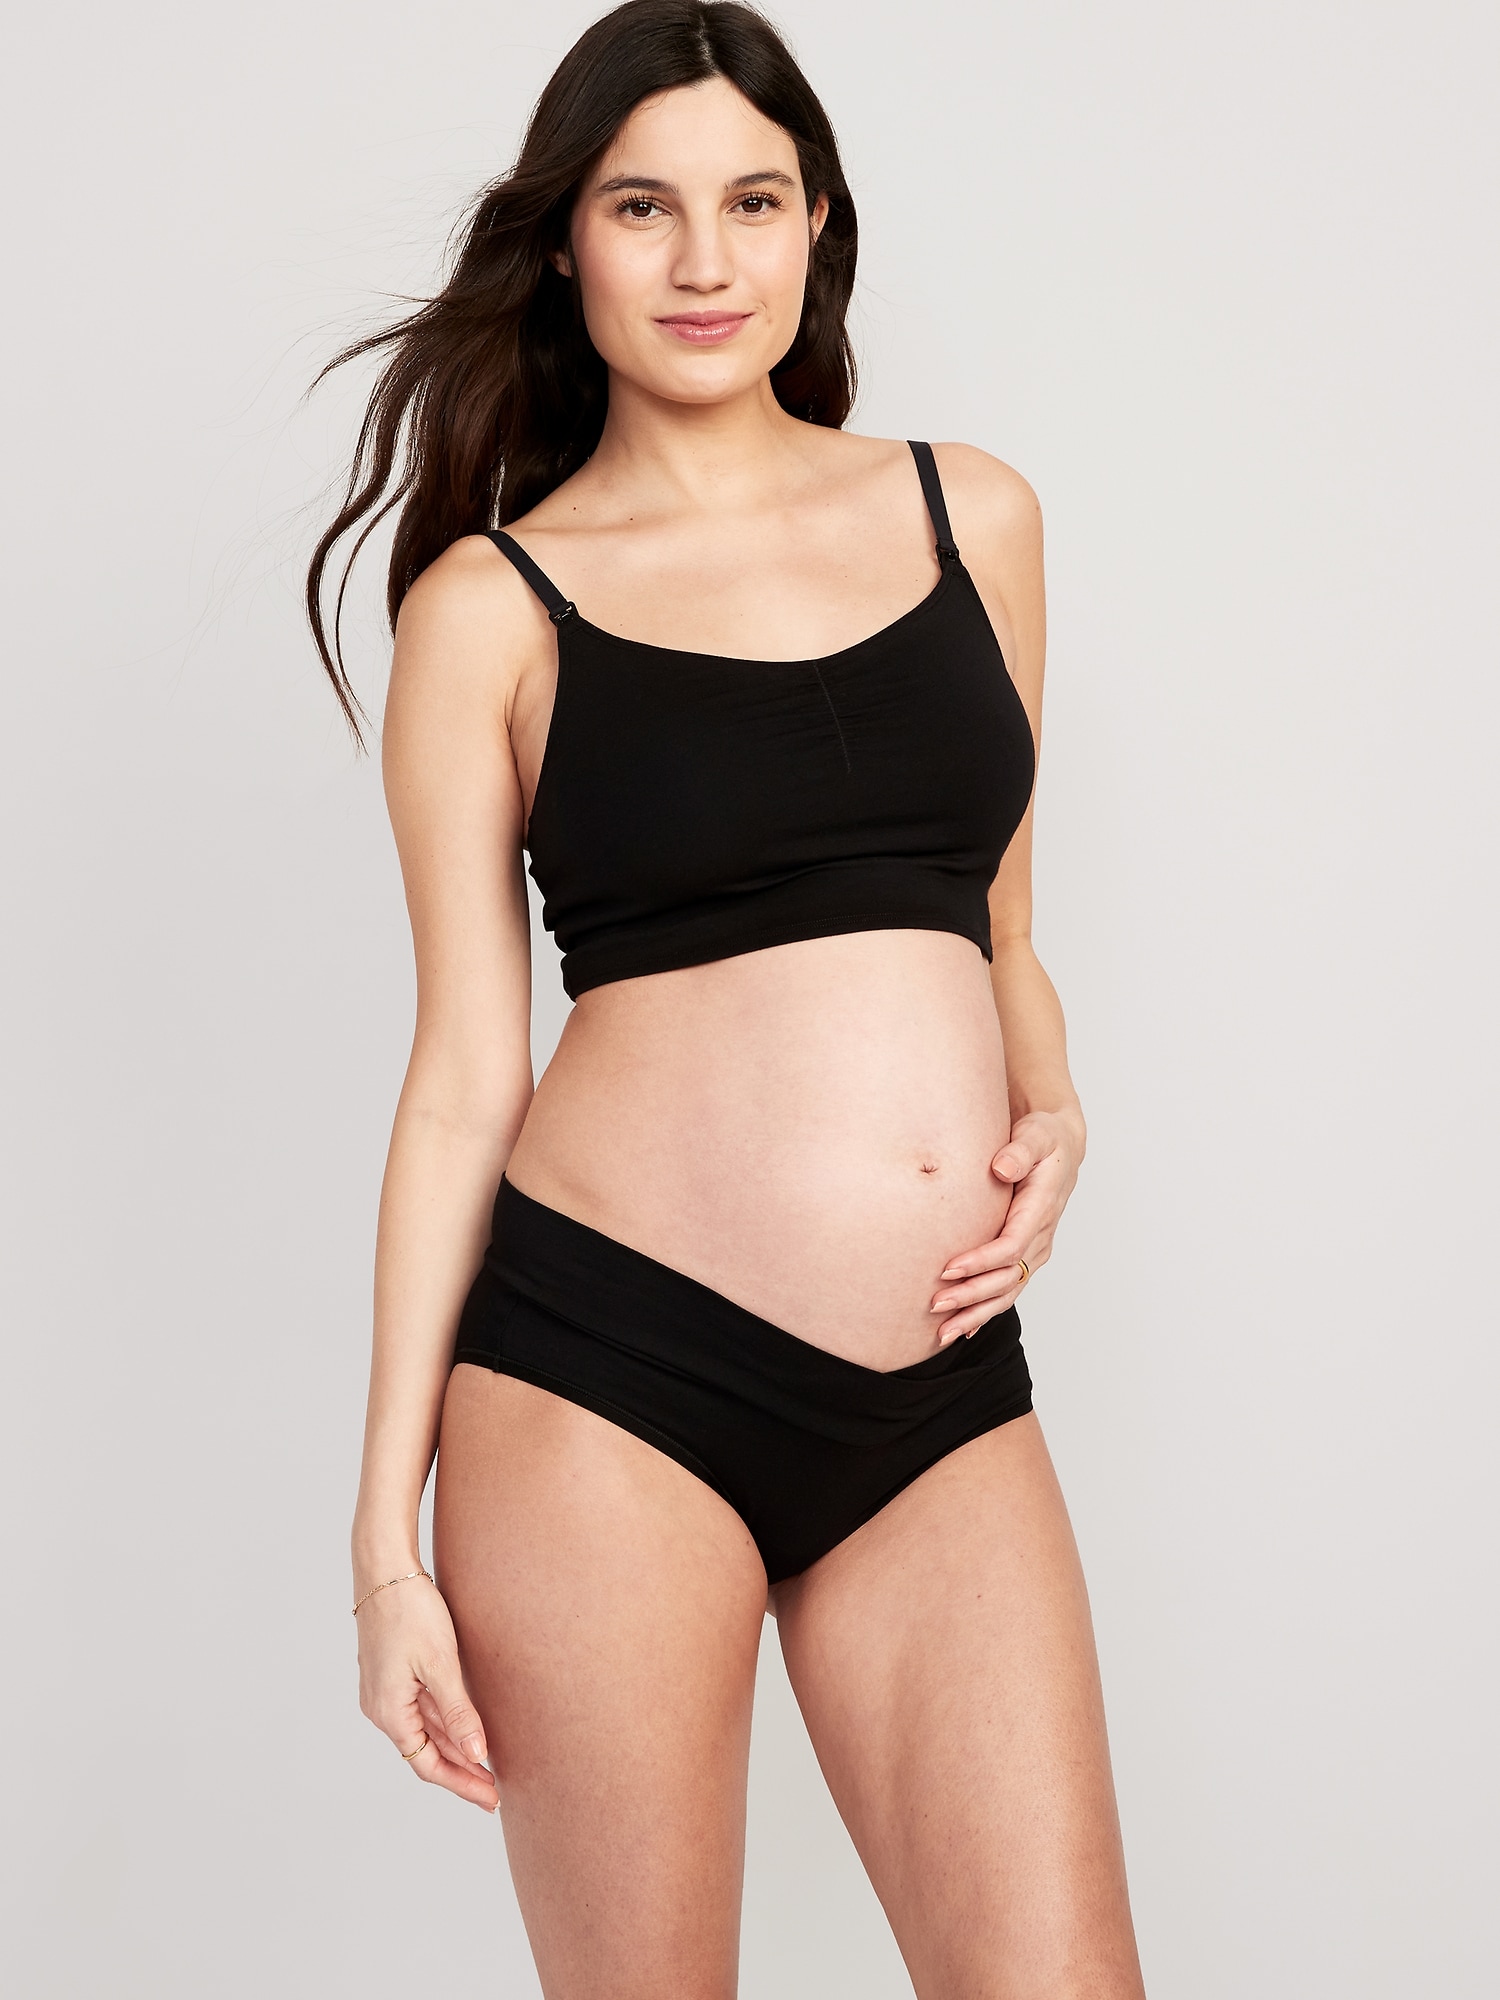 Panties at the Ready: A Guide to Maternity Underwear – BABYGO